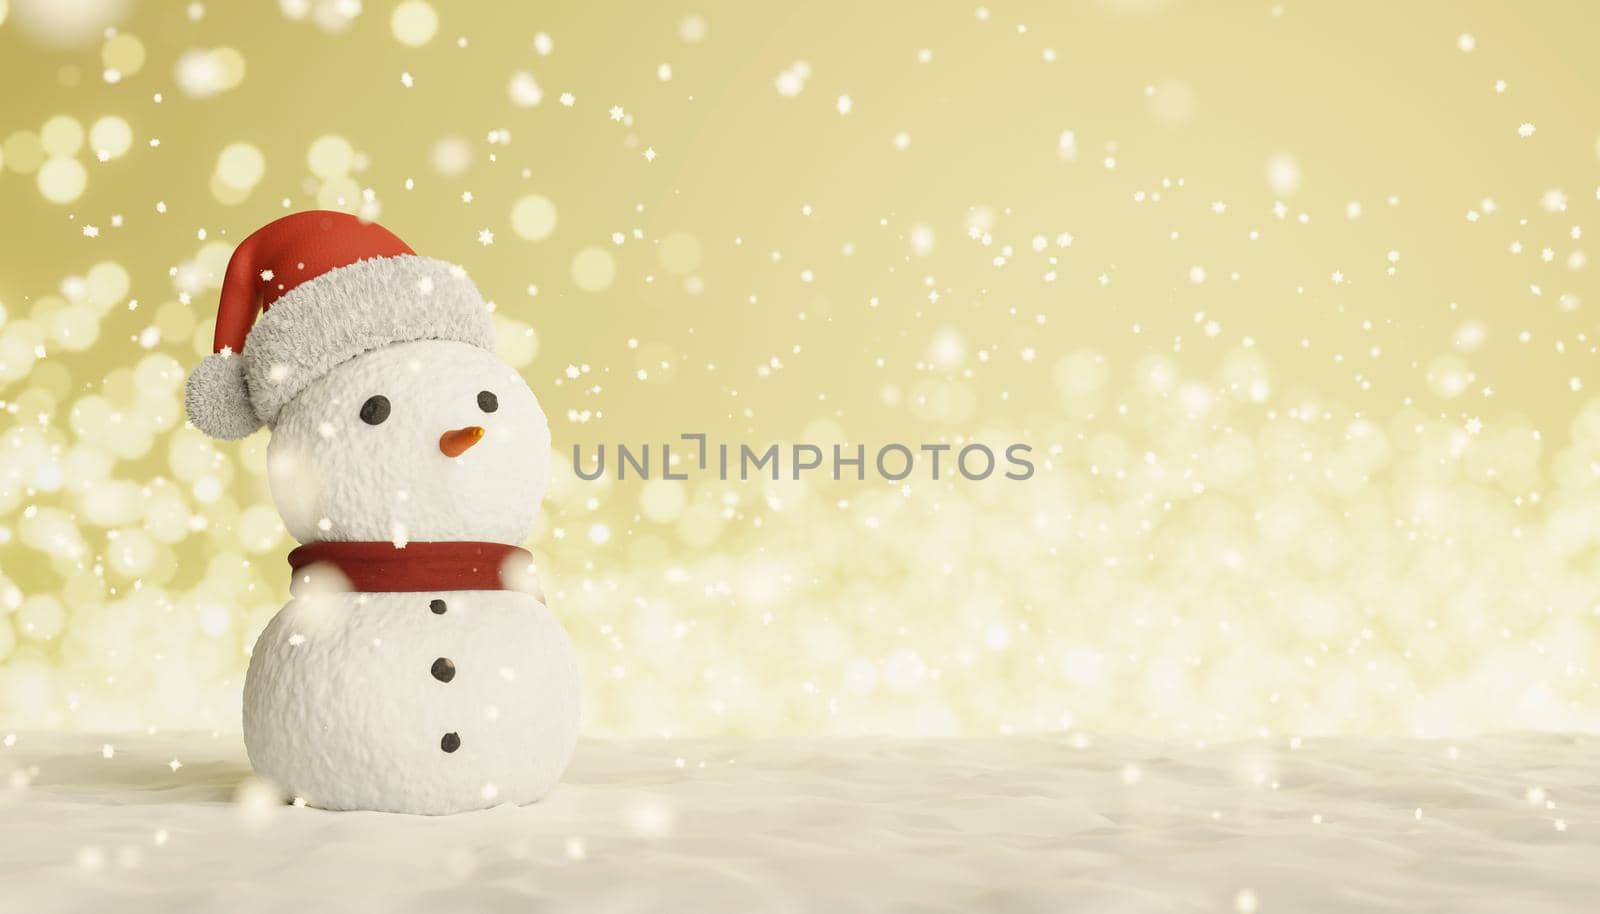 snowman on snowy background with warm lights by asolano